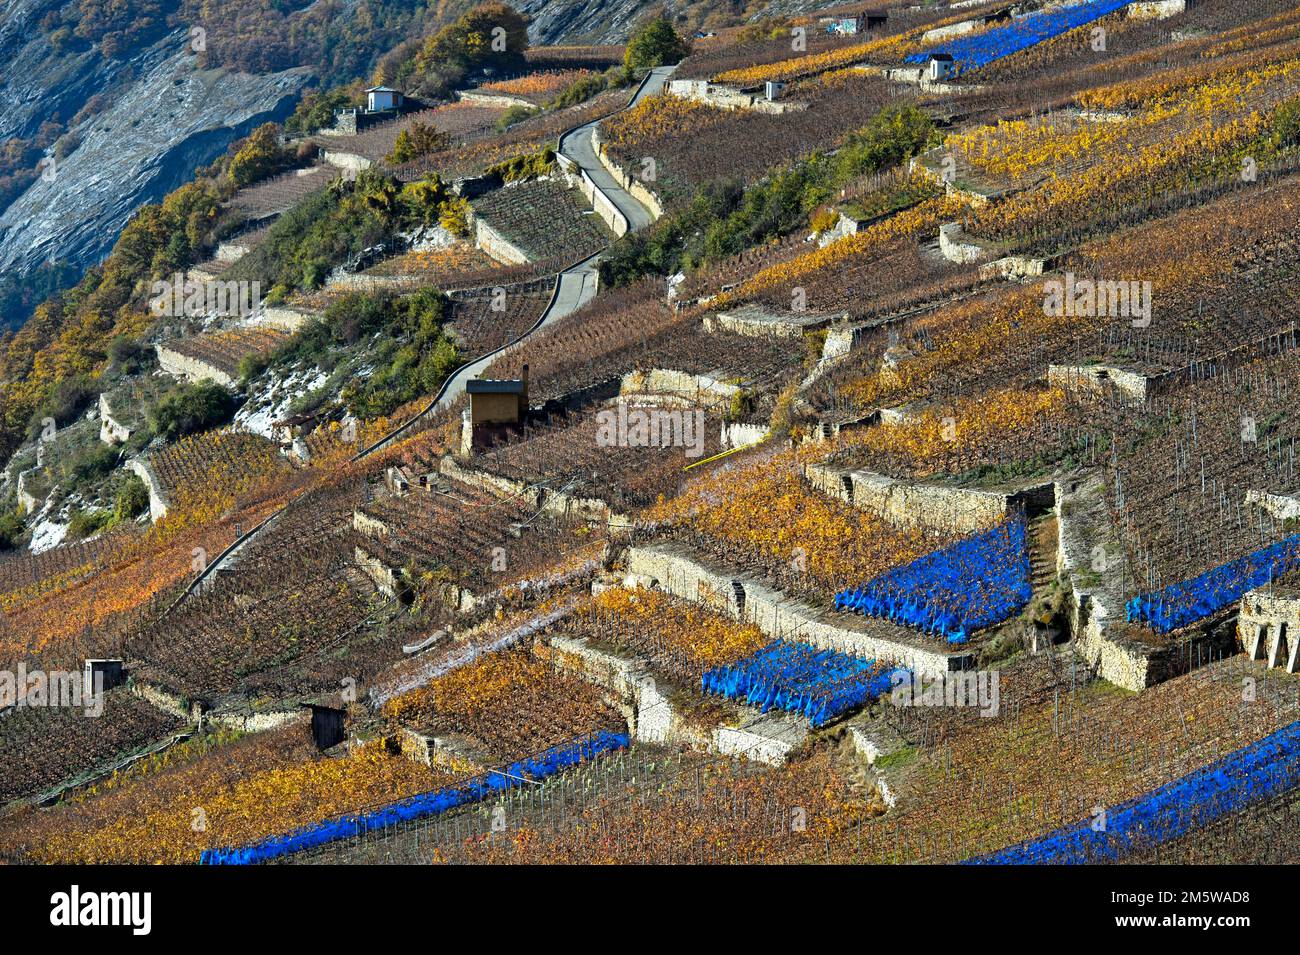 Vineyard terraces with blue bird protection nets on a sunny slope above the Rhone valley, Vetroz, Valais, Switzerland Stock Photo